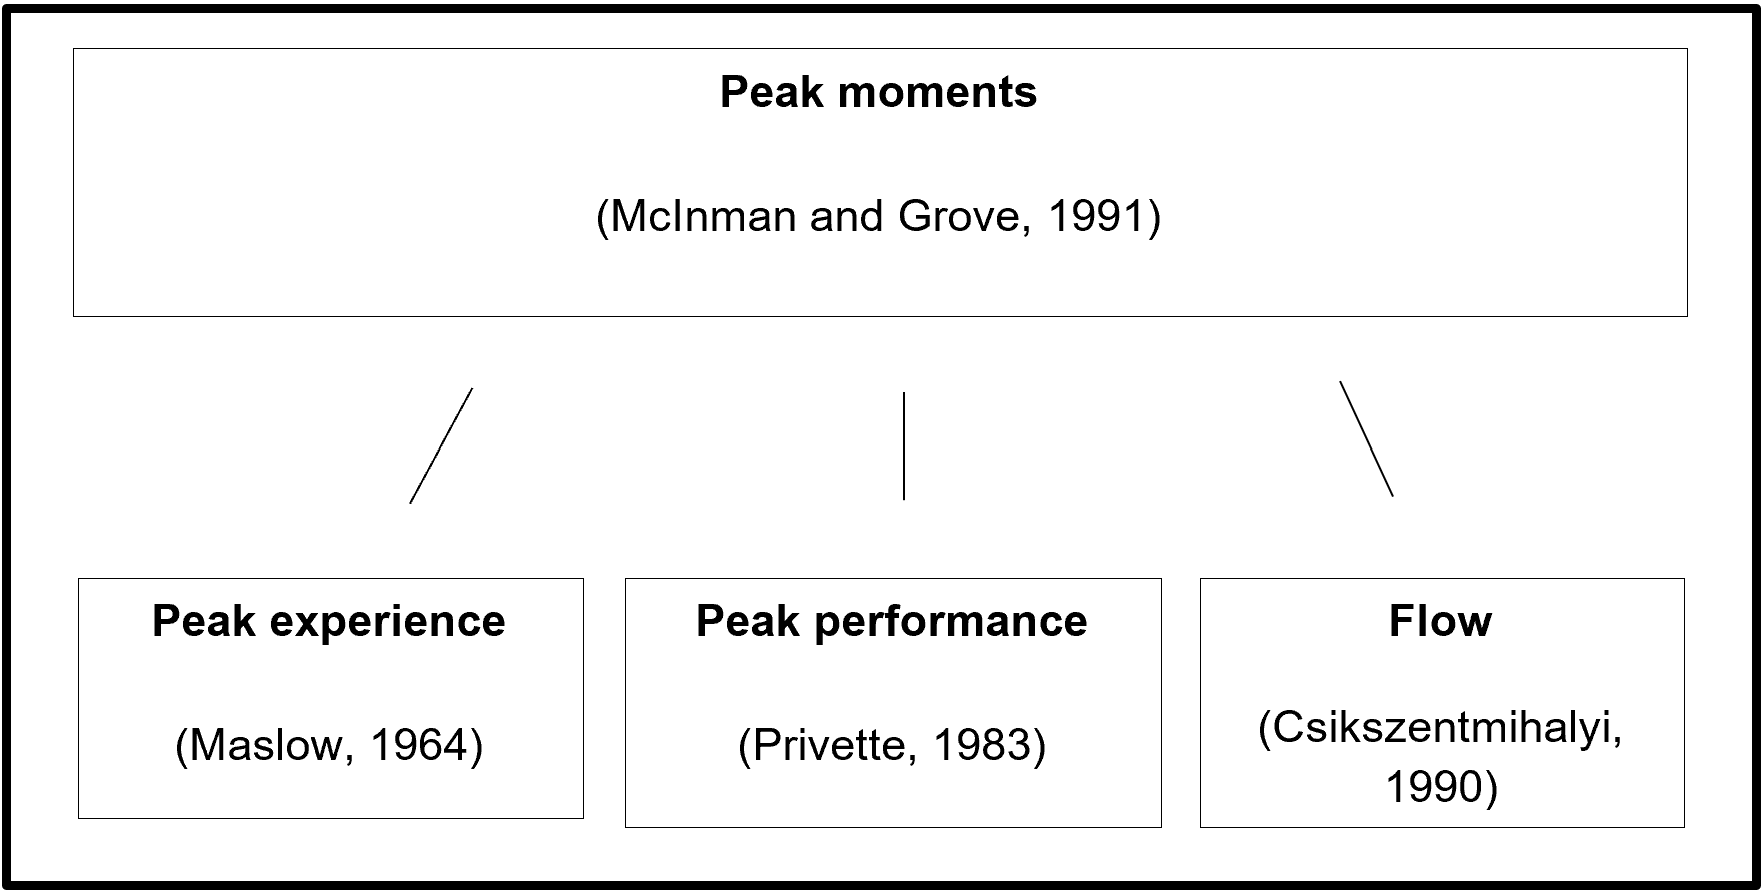 The relationship between peak moments and the three constructs